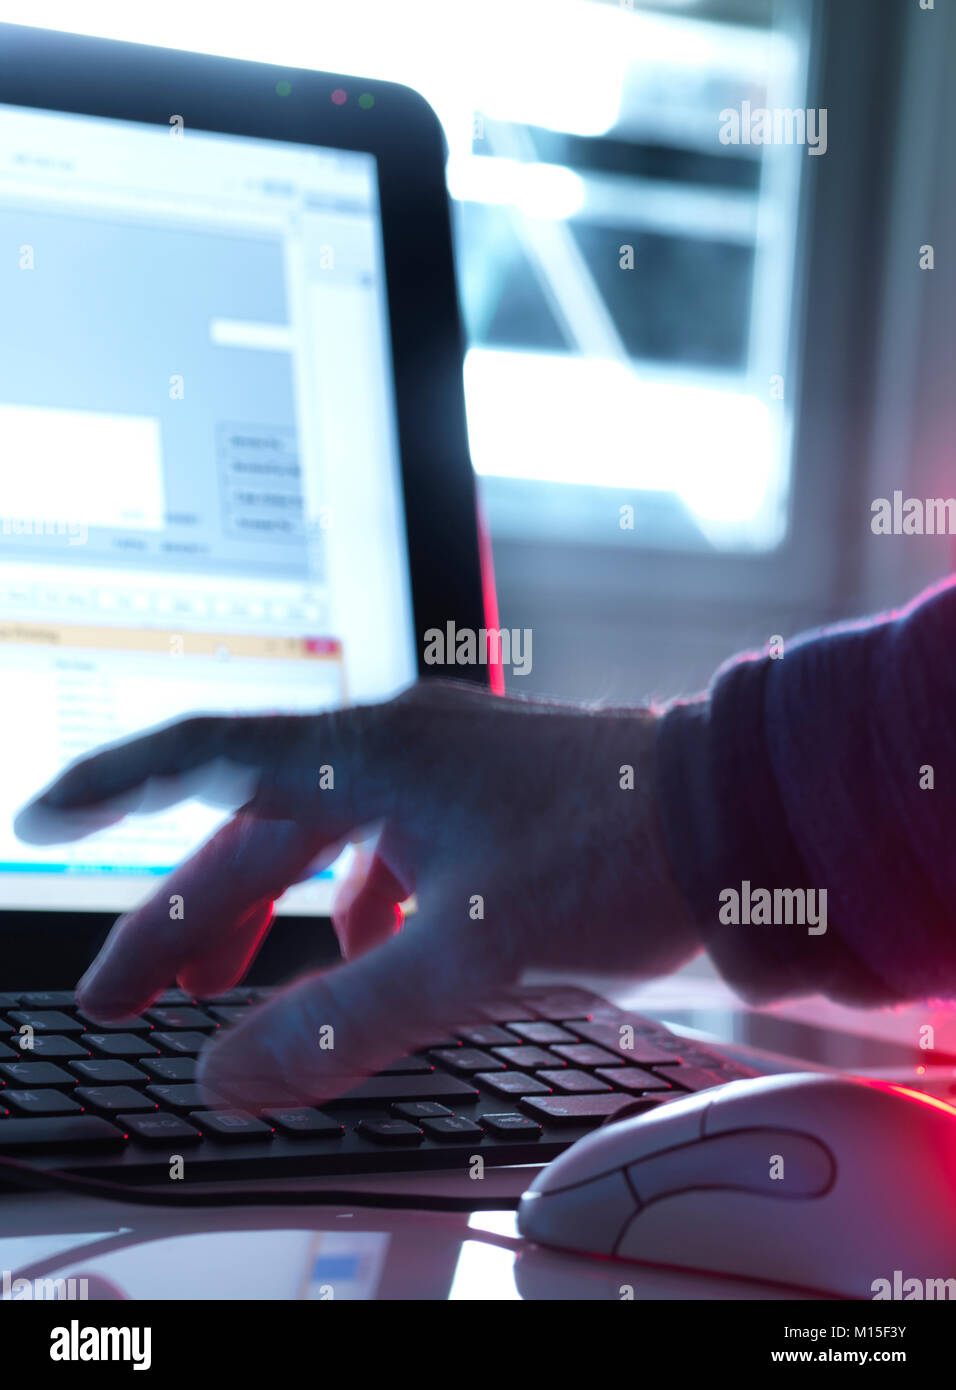 MODEL RELEASED. Computer hacking, conceptual image. Stock Photo